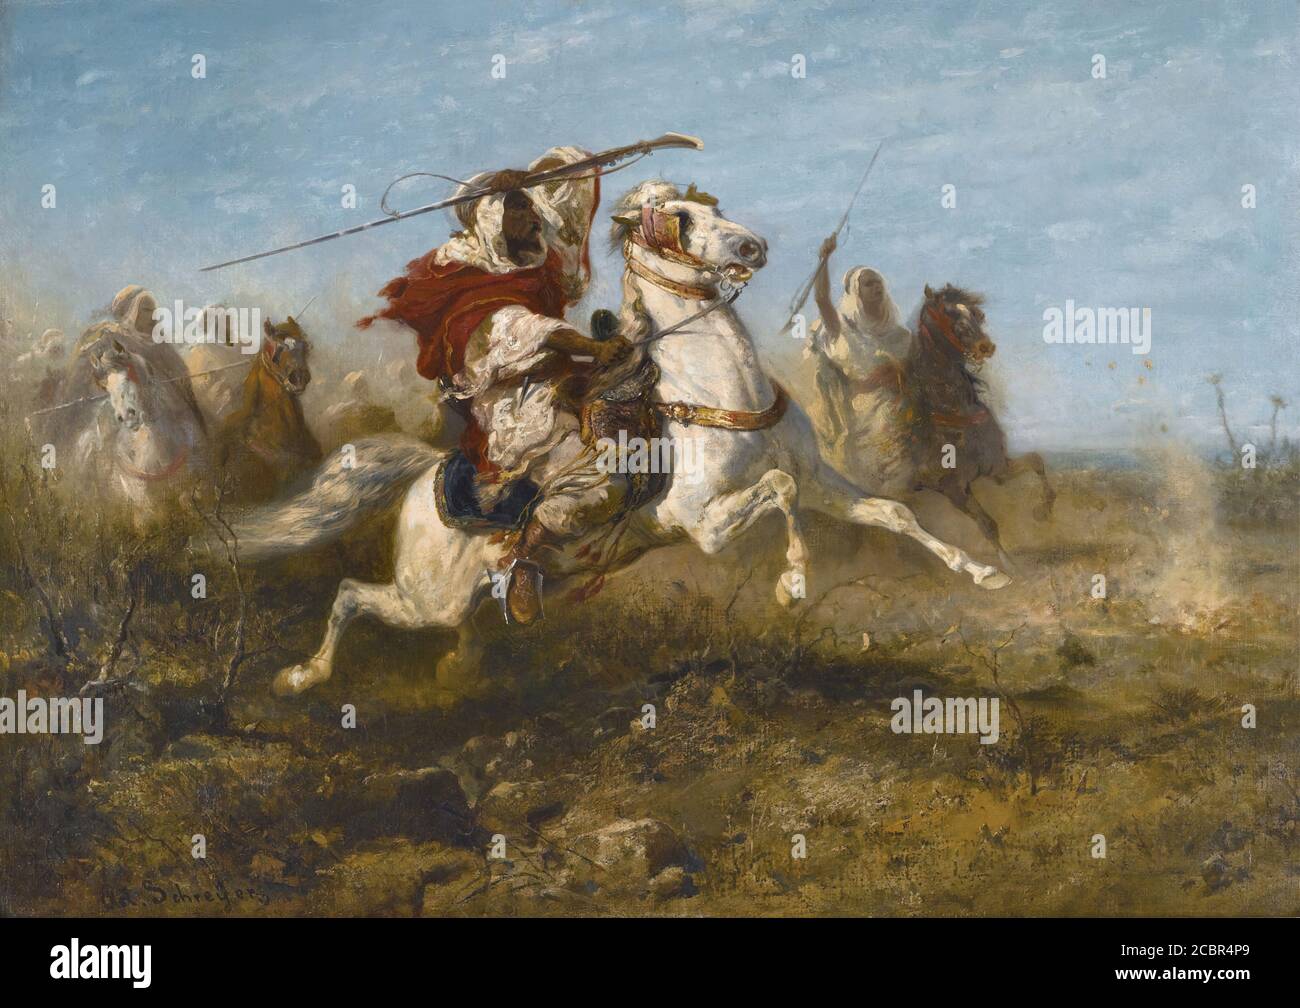 Schreyer Adolf - the Pursuit 1 (Arab Warriors) - German School - 19th and Early 20th Century Stock Photo